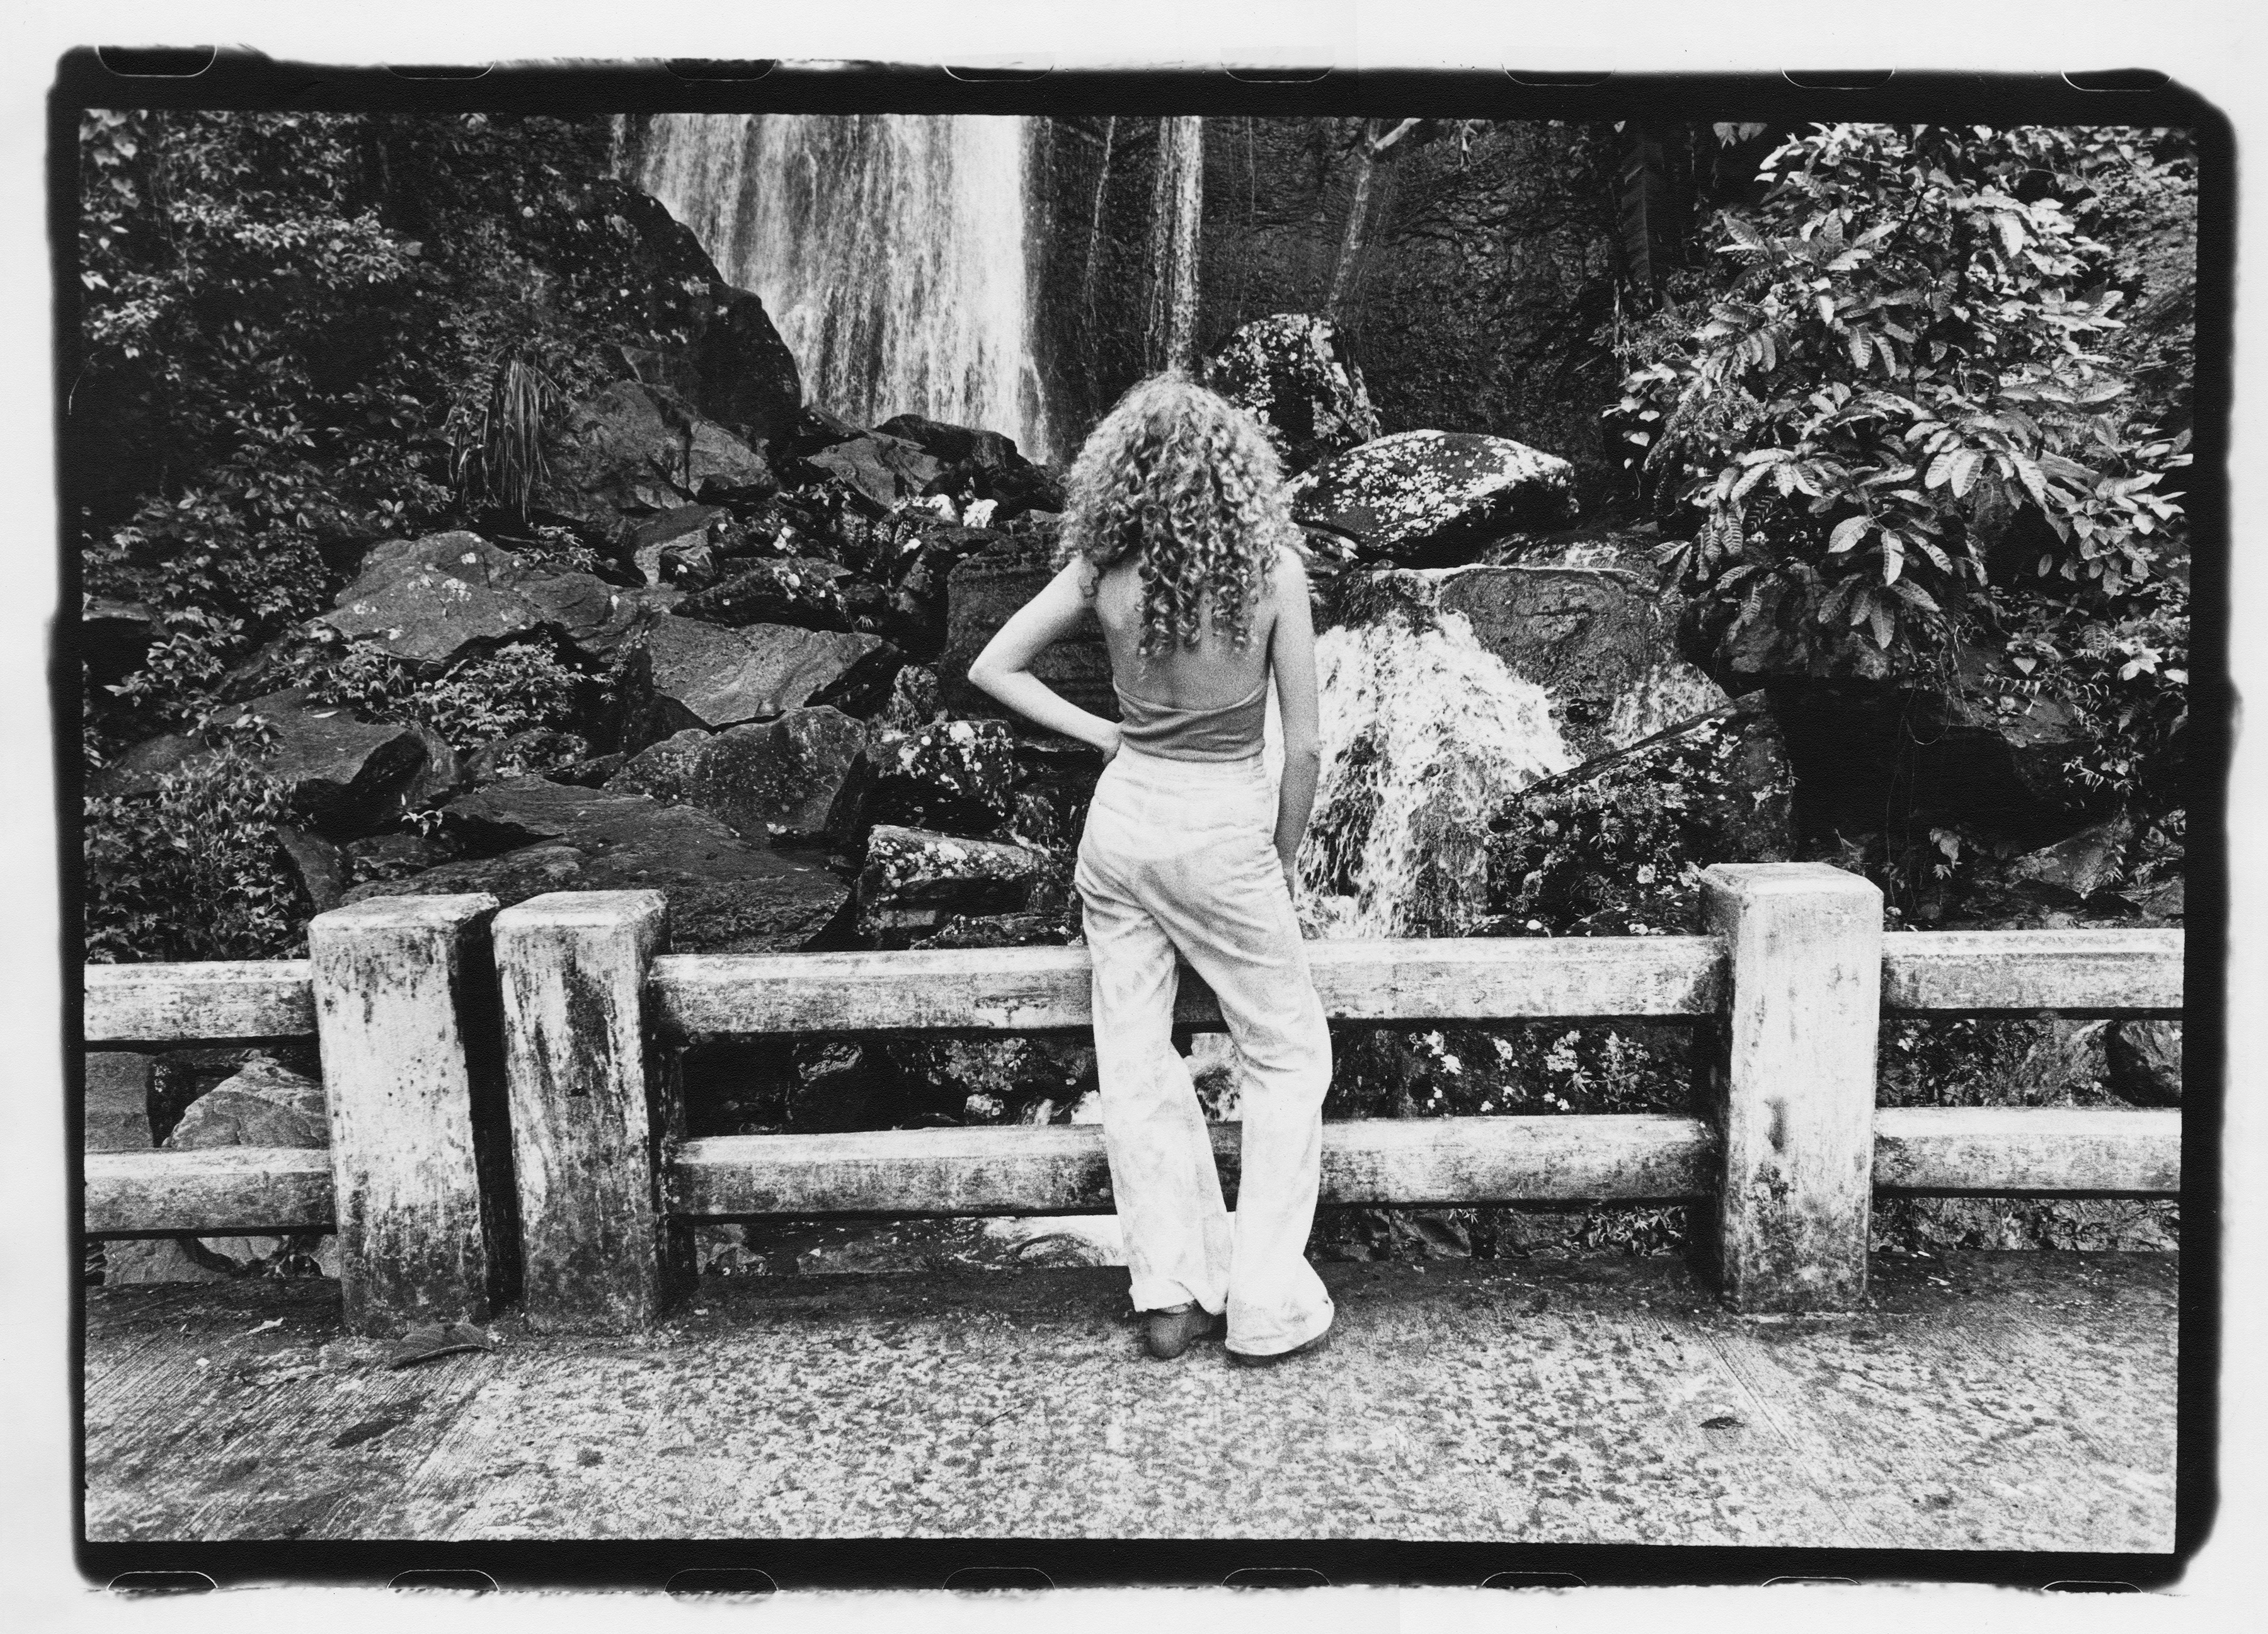 Photograph of a model standing with her back to the camera in front of a waterfall photographed by Marcia Resnick.